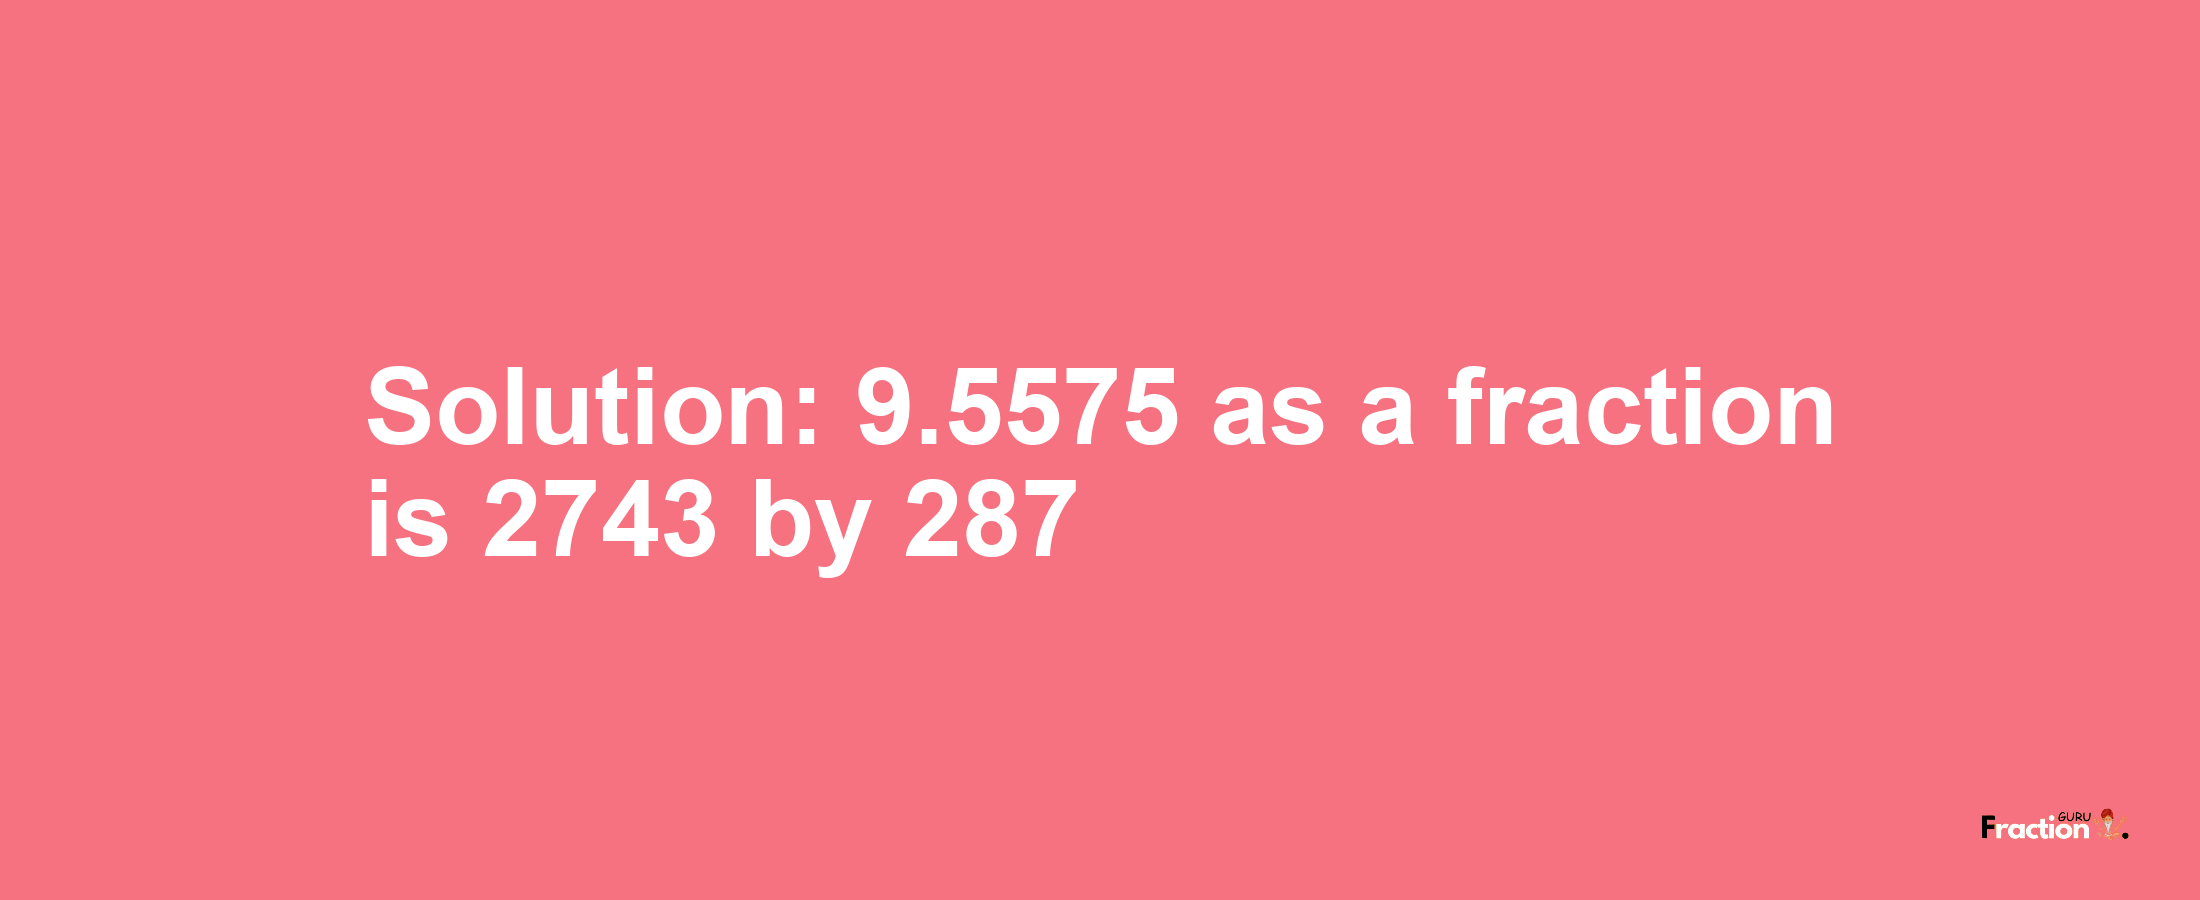 Solution:9.5575 as a fraction is 2743/287